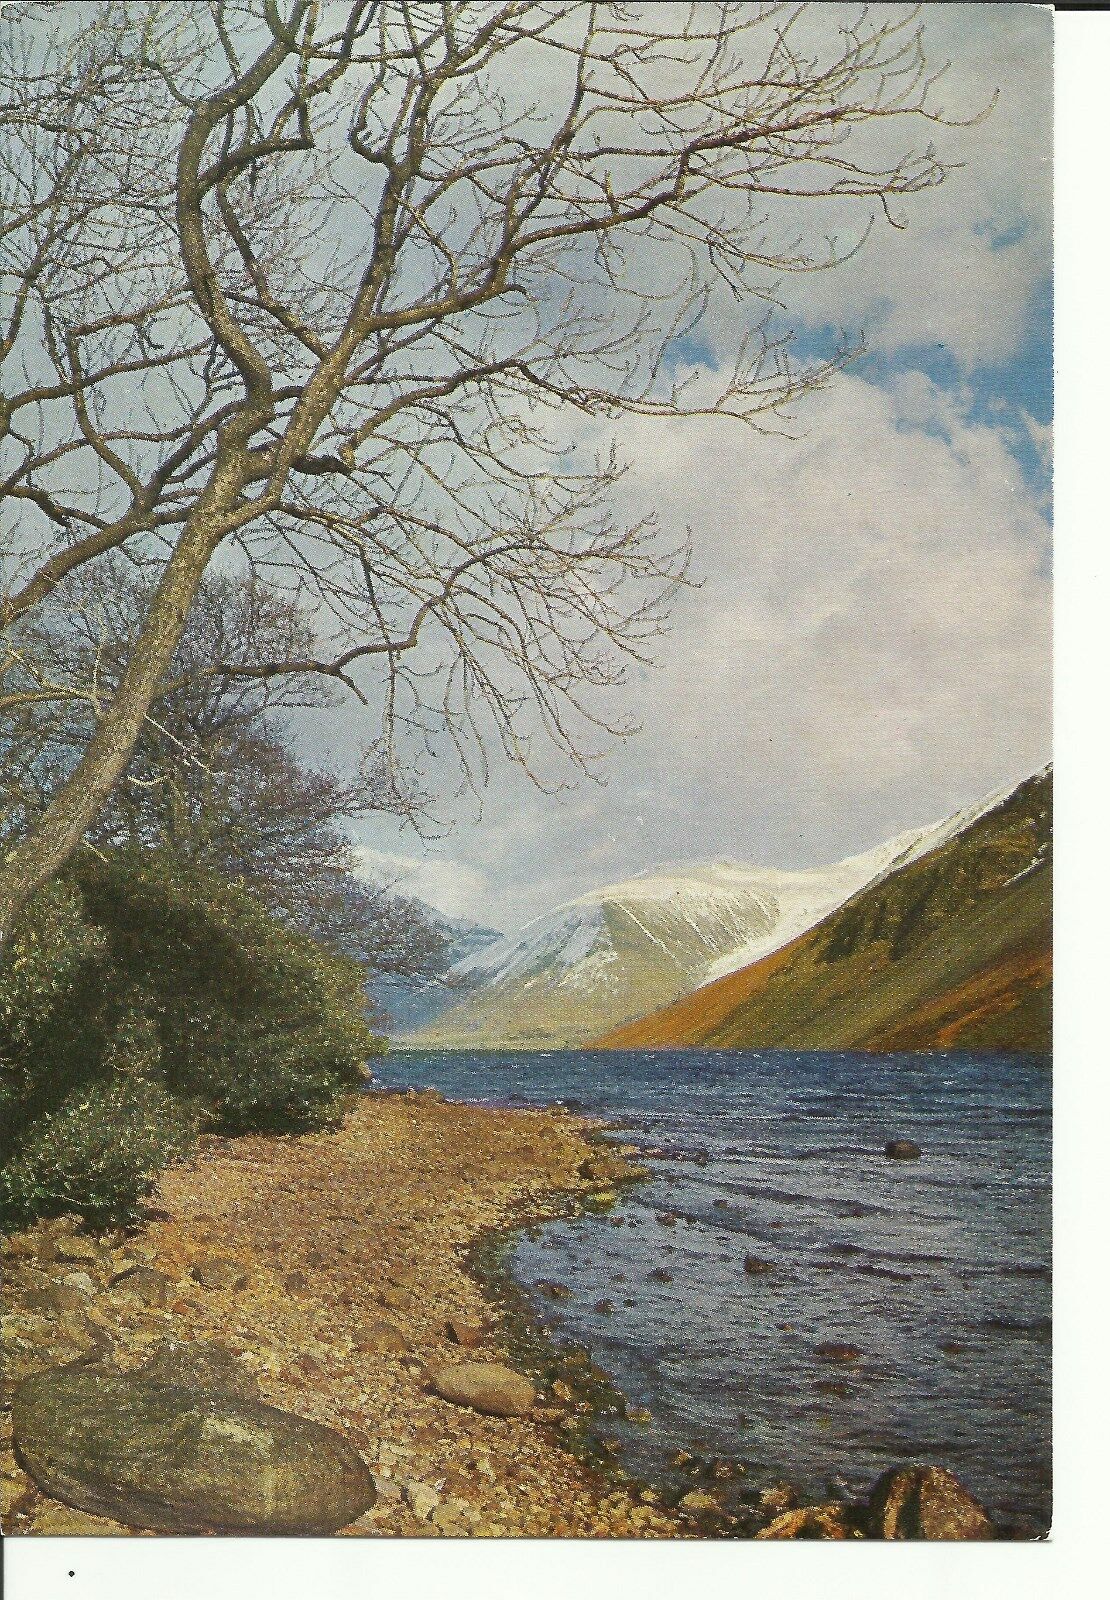 House Clearance - Looking up Wastwater towards Lingmell Fell (Lake District)